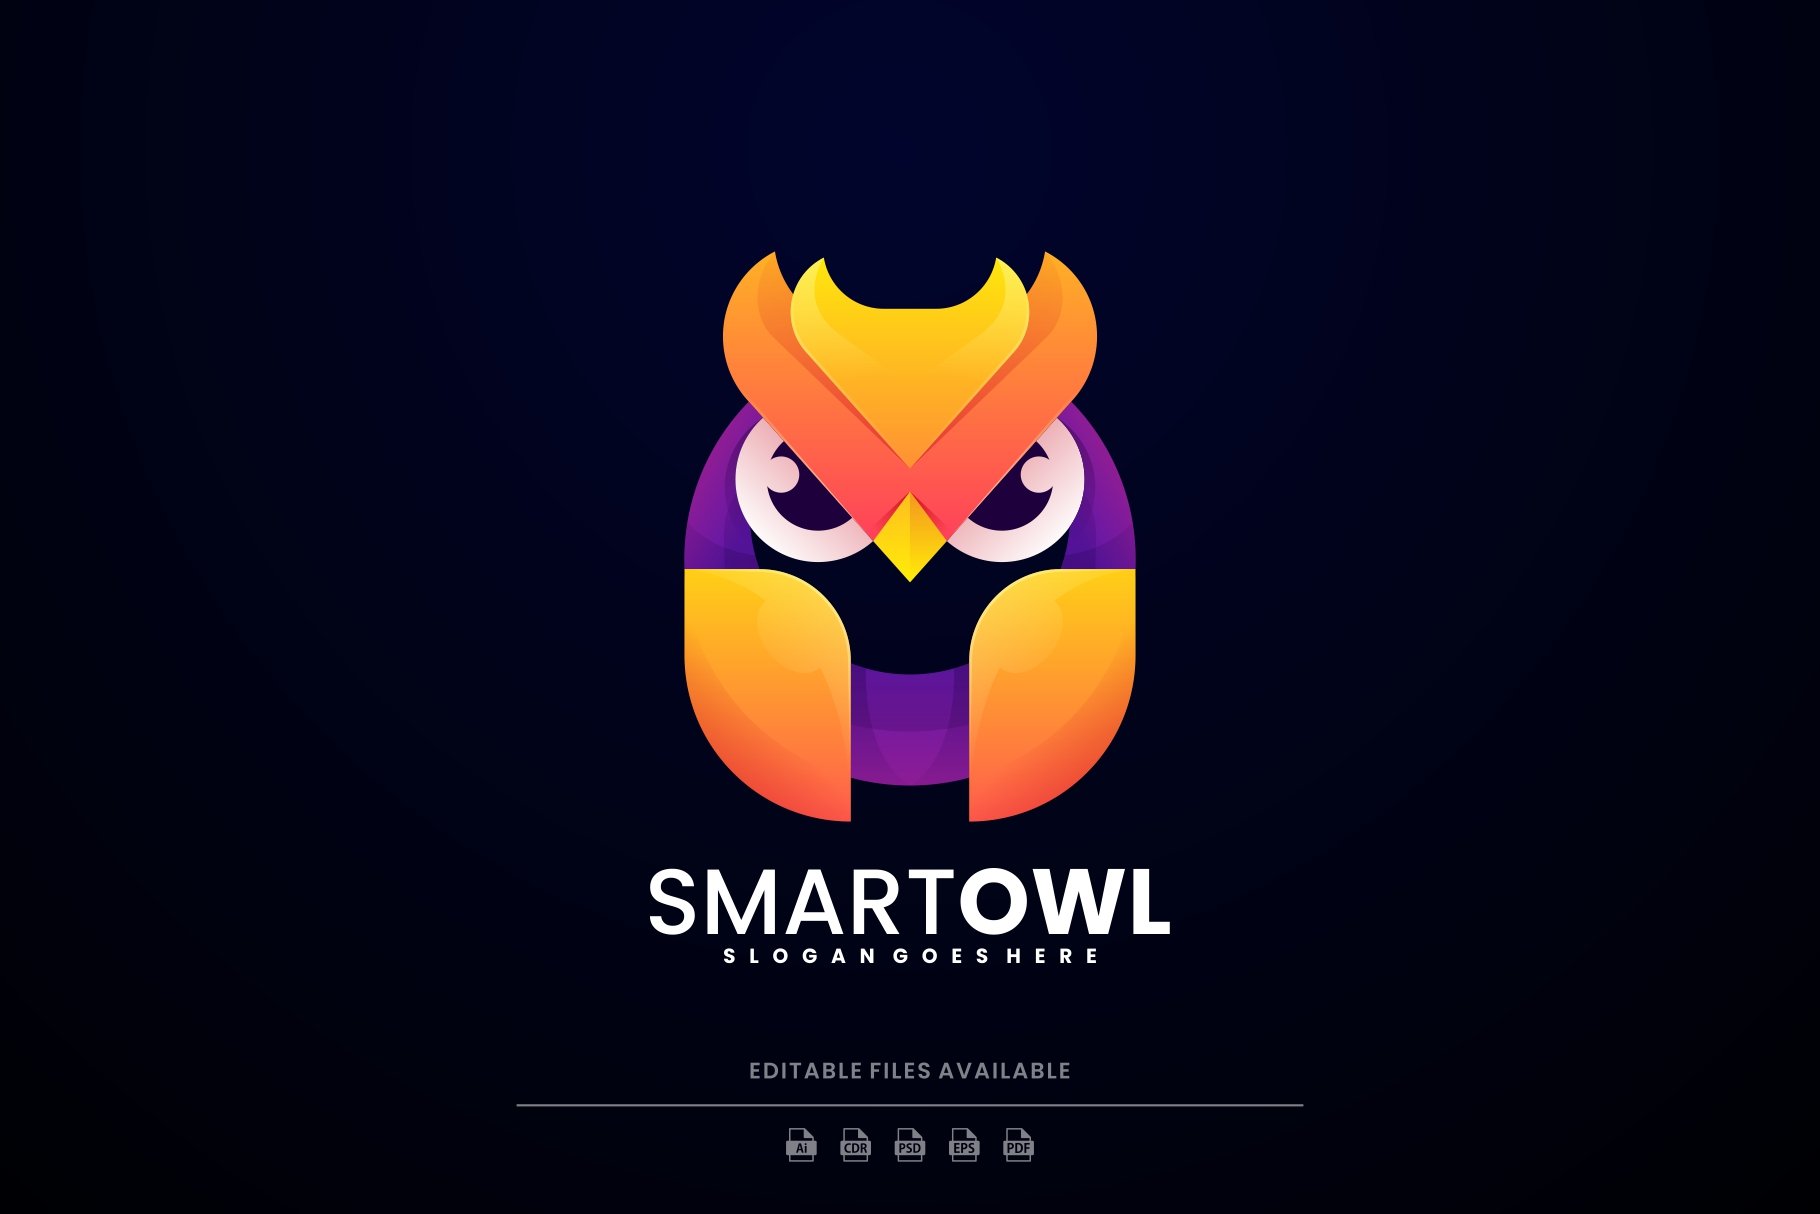 Smart Owl Gradient Colorful Logo cover image.